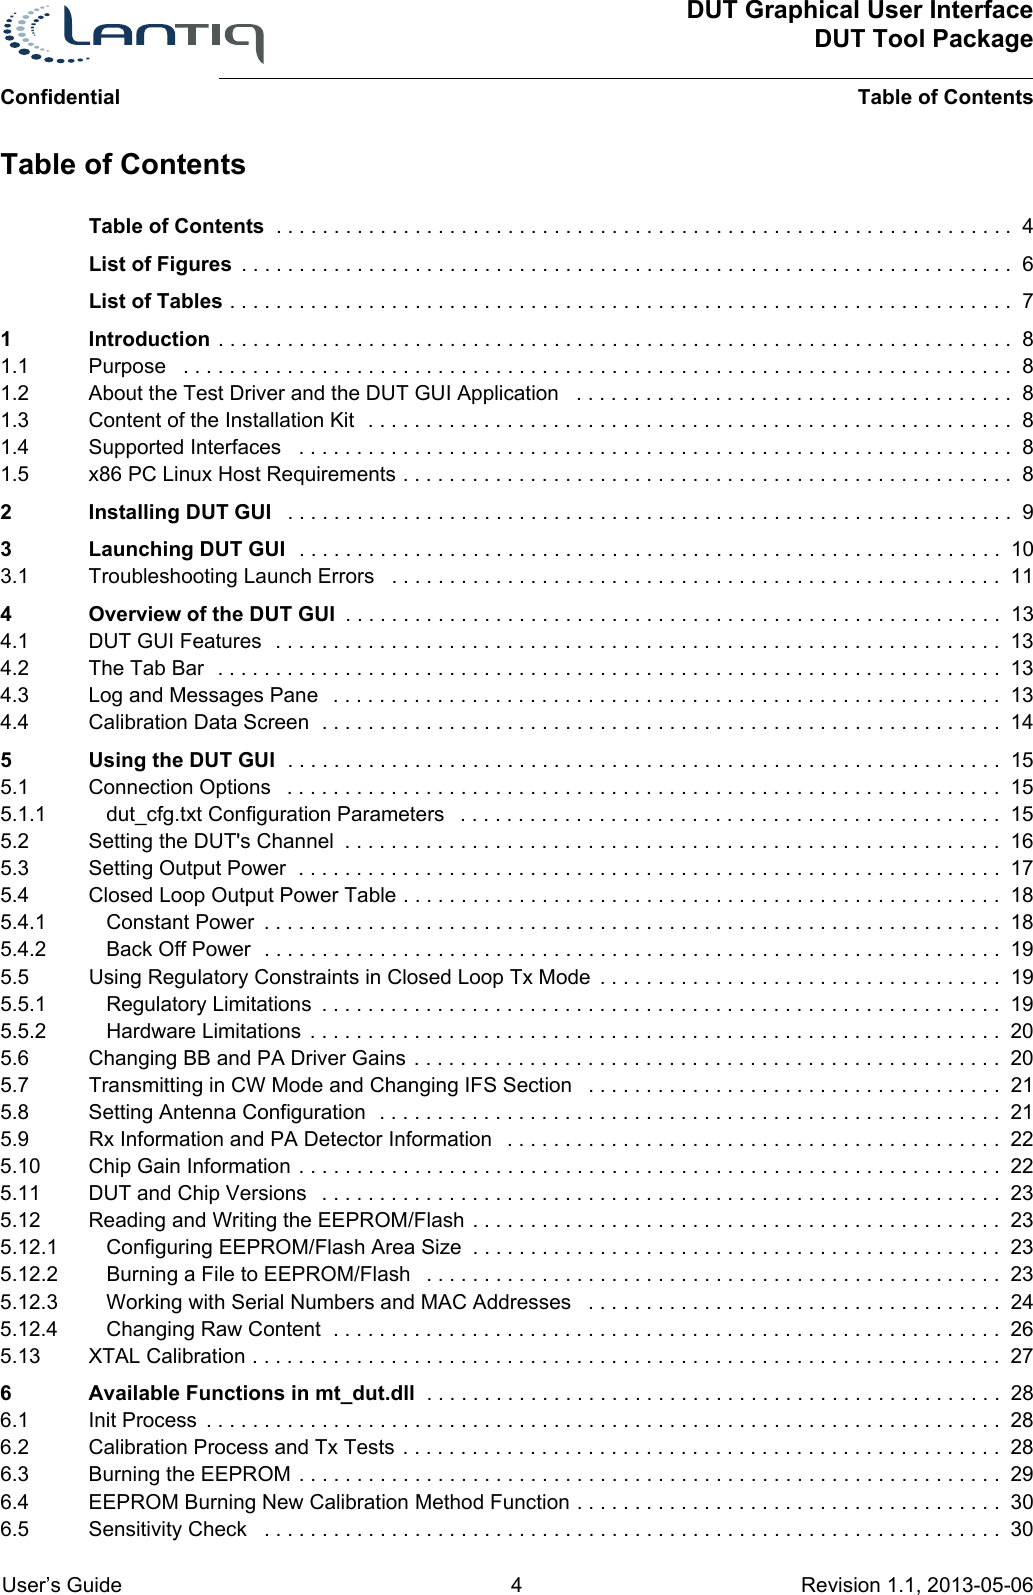 DUT Graphical User InterfaceDUT Tool PackageTable of Contents User’s Guide 4 Revision 1.1, 2013-05-06      ConfidentialTable of Contents  . . . . . . . . . . . . . . . . . . . . . . . . . . . . . . . . . . . . . . . . . . . . . . . . . . . . . . . . . . . . . . . . 4List of Figures  . . . . . . . . . . . . . . . . . . . . . . . . . . . . . . . . . . . . . . . . . . . . . . . . . . . . . . . . . . . . . . . . . . .  6List of Tables . . . . . . . . . . . . . . . . . . . . . . . . . . . . . . . . . . . . . . . . . . . . . . . . . . . . . . . . . . . . . . . . . . . .  71 Introduction . . . . . . . . . . . . . . . . . . . . . . . . . . . . . . . . . . . . . . . . . . . . . . . . . . . . . . . . . . . . . . . . . . . . .  81.1 Purpose   . . . . . . . . . . . . . . . . . . . . . . . . . . . . . . . . . . . . . . . . . . . . . . . . . . . . . . . . . . . . . . . . . . . . . . . .  81.2 About the Test Driver and the DUT GUI Application   . . . . . . . . . . . . . . . . . . . . . . . . . . . . . . . . . . . . . . 81.3 Content of the Installation Kit  . . . . . . . . . . . . . . . . . . . . . . . . . . . . . . . . . . . . . . . . . . . . . . . . . . . . . . . .  81.4 Supported Interfaces   . . . . . . . . . . . . . . . . . . . . . . . . . . . . . . . . . . . . . . . . . . . . . . . . . . . . . . . . . . . . . .  81.5 x86 PC Linux Host Requirements . . . . . . . . . . . . . . . . . . . . . . . . . . . . . . . . . . . . . . . . . . . . . . . . . . . . .  82 Installing DUT GUI   . . . . . . . . . . . . . . . . . . . . . . . . . . . . . . . . . . . . . . . . . . . . . . . . . . . . . . . . . . . . . . .  93 Launching DUT GUI  . . . . . . . . . . . . . . . . . . . . . . . . . . . . . . . . . . . . . . . . . . . . . . . . . . . . . . . . . . . . .  103.1 Troubleshooting Launch Errors   . . . . . . . . . . . . . . . . . . . . . . . . . . . . . . . . . . . . . . . . . . . . . . . . . . . . .  114 Overview of the DUT GUI  . . . . . . . . . . . . . . . . . . . . . . . . . . . . . . . . . . . . . . . . . . . . . . . . . . . . . . . . .  134.1 DUT GUI Features  . . . . . . . . . . . . . . . . . . . . . . . . . . . . . . . . . . . . . . . . . . . . . . . . . . . . . . . . . . . . . . .  134.2 The Tab Bar  . . . . . . . . . . . . . . . . . . . . . . . . . . . . . . . . . . . . . . . . . . . . . . . . . . . . . . . . . . . . . . . . . . . .  134.3 Log and Messages Pane   . . . . . . . . . . . . . . . . . . . . . . . . . . . . . . . . . . . . . . . . . . . . . . . . . . . . . . . . . .  134.4 Calibration Data Screen  . . . . . . . . . . . . . . . . . . . . . . . . . . . . . . . . . . . . . . . . . . . . . . . . . . . . . . . . . . .  145 Using the DUT GUI  . . . . . . . . . . . . . . . . . . . . . . . . . . . . . . . . . . . . . . . . . . . . . . . . . . . . . . . . . . . . . .  155.1 Connection Options   . . . . . . . . . . . . . . . . . . . . . . . . . . . . . . . . . . . . . . . . . . . . . . . . . . . . . . . . . . . . . .  155.1.1 dut_cfg.txt Configuration Parameters   . . . . . . . . . . . . . . . . . . . . . . . . . . . . . . . . . . . . . . . . . . . . . . .  155.2 Setting the DUT&apos;s Channel  . . . . . . . . . . . . . . . . . . . . . . . . . . . . . . . . . . . . . . . . . . . . . . . . . . . . . . . . .  165.3 Setting Output Power  . . . . . . . . . . . . . . . . . . . . . . . . . . . . . . . . . . . . . . . . . . . . . . . . . . . . . . . . . . . . .  175.4 Closed Loop Output Power Table . . . . . . . . . . . . . . . . . . . . . . . . . . . . . . . . . . . . . . . . . . . . . . . . . . . .  185.4.1 Constant Power  . . . . . . . . . . . . . . . . . . . . . . . . . . . . . . . . . . . . . . . . . . . . . . . . . . . . . . . . . . . . . . . .  185.4.2 Back Off Power  . . . . . . . . . . . . . . . . . . . . . . . . . . . . . . . . . . . . . . . . . . . . . . . . . . . . . . . . . . . . . . . .  195.5 Using Regulatory Constraints in Closed Loop Tx Mode  . . . . . . . . . . . . . . . . . . . . . . . . . . . . . . . . . . .  195.5.1 Regulatory Limitations  . . . . . . . . . . . . . . . . . . . . . . . . . . . . . . . . . . . . . . . . . . . . . . . . . . . . . . . . . . .  195.5.2 Hardware Limitations  . . . . . . . . . . . . . . . . . . . . . . . . . . . . . . . . . . . . . . . . . . . . . . . . . . . . . . . . . . . .  205.6 Changing BB and PA Driver Gains . . . . . . . . . . . . . . . . . . . . . . . . . . . . . . . . . . . . . . . . . . . . . . . . . . .  205.7 Transmitting in CW Mode and Changing IFS Section   . . . . . . . . . . . . . . . . . . . . . . . . . . . . . . . . . . . .  215.8 Setting Antenna Configuration  . . . . . . . . . . . . . . . . . . . . . . . . . . . . . . . . . . . . . . . . . . . . . . . . . . . . . .  215.9 Rx Information and PA Detector Information   . . . . . . . . . . . . . . . . . . . . . . . . . . . . . . . . . . . . . . . . . . .  225.10 Chip Gain Information . . . . . . . . . . . . . . . . . . . . . . . . . . . . . . . . . . . . . . . . . . . . . . . . . . . . . . . . . . . . .  225.11 DUT and Chip Versions   . . . . . . . . . . . . . . . . . . . . . . . . . . . . . . . . . . . . . . . . . . . . . . . . . . . . . . . . . . .  235.12 Reading and Writing the EEPROM/Flash . . . . . . . . . . . . . . . . . . . . . . . . . . . . . . . . . . . . . . . . . . . . . .  235.12.1 Configuring EEPROM/Flash Area Size  . . . . . . . . . . . . . . . . . . . . . . . . . . . . . . . . . . . . . . . . . . . . . .  235.12.2 Burning a File to EEPROM/Flash   . . . . . . . . . . . . . . . . . . . . . . . . . . . . . . . . . . . . . . . . . . . . . . . . . .  235.12.3 Working with Serial Numbers and MAC Addresses   . . . . . . . . . . . . . . . . . . . . . . . . . . . . . . . . . . . .  245.12.4 Changing Raw Content  . . . . . . . . . . . . . . . . . . . . . . . . . . . . . . . . . . . . . . . . . . . . . . . . . . . . . . . . . .  265.13 XTAL Calibration . . . . . . . . . . . . . . . . . . . . . . . . . . . . . . . . . . . . . . . . . . . . . . . . . . . . . . . . . . . . . . . . .  276 Available Functions in mt_dut.dll  . . . . . . . . . . . . . . . . . . . . . . . . . . . . . . . . . . . . . . . . . . . . . . . . . .  286.1 Init Process  . . . . . . . . . . . . . . . . . . . . . . . . . . . . . . . . . . . . . . . . . . . . . . . . . . . . . . . . . . . . . . . . . . . . .  286.2 Calibration Process and Tx Tests . . . . . . . . . . . . . . . . . . . . . . . . . . . . . . . . . . . . . . . . . . . . . . . . . . . .  286.3 Burning the EEPROM . . . . . . . . . . . . . . . . . . . . . . . . . . . . . . . . . . . . . . . . . . . . . . . . . . . . . . . . . . . . .  296.4 EEPROM Burning New Calibration Method Function . . . . . . . . . . . . . . . . . . . . . . . . . . . . . . . . . . . . .  306.5 Sensitivity Check   . . . . . . . . . . . . . . . . . . . . . . . . . . . . . . . . . . . . . . . . . . . . . . . . . . . . . . . . . . . . . . . .  30Table of Contents